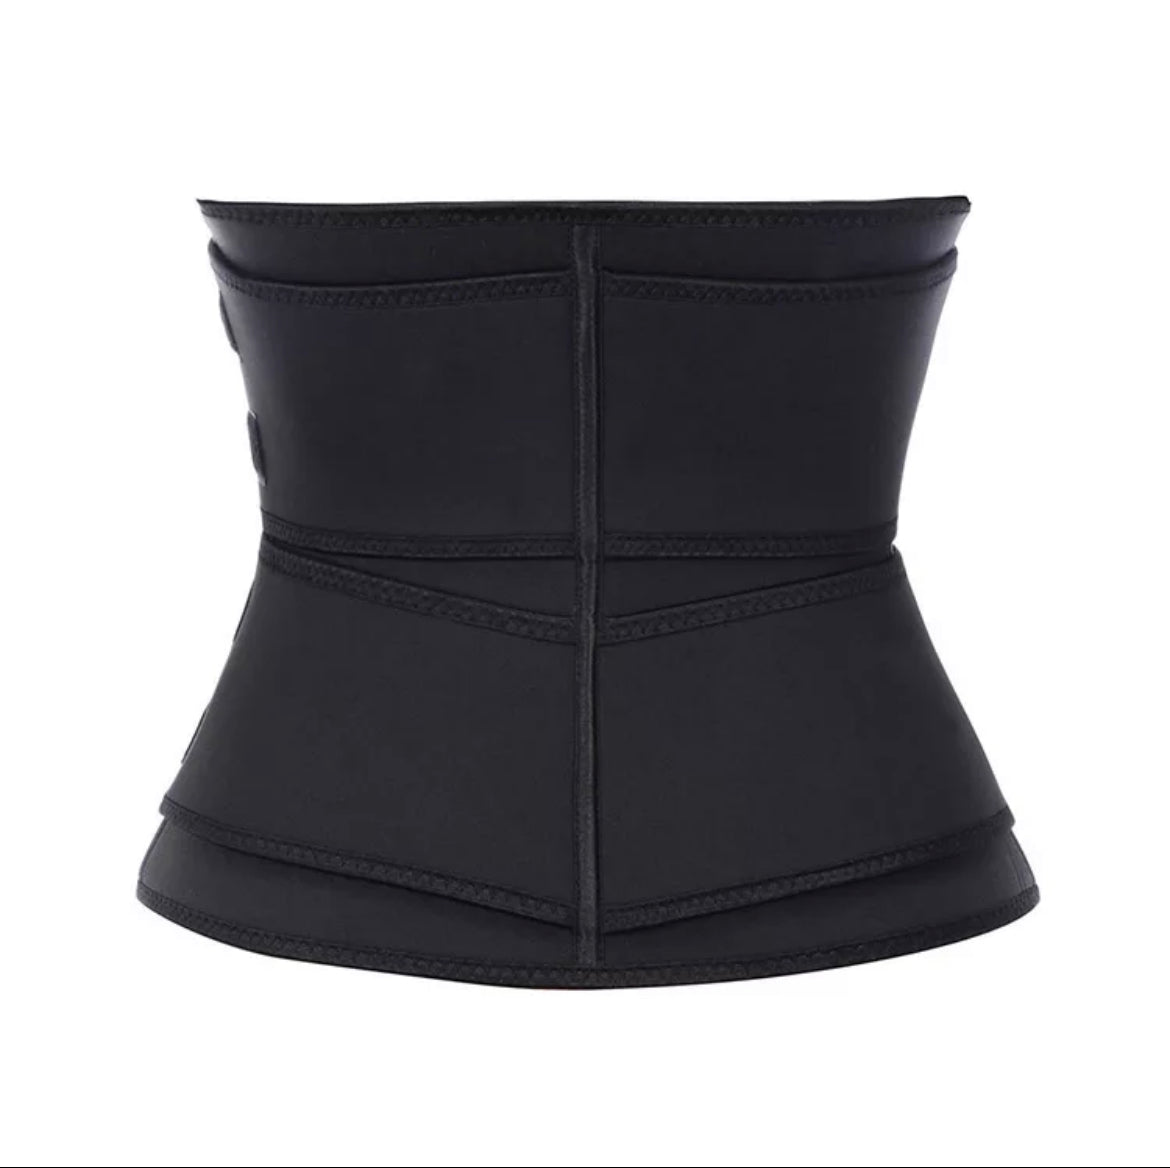 Fupa Be Gone Waist Trainer For Women Full Body Plus Size, Fupa Cont